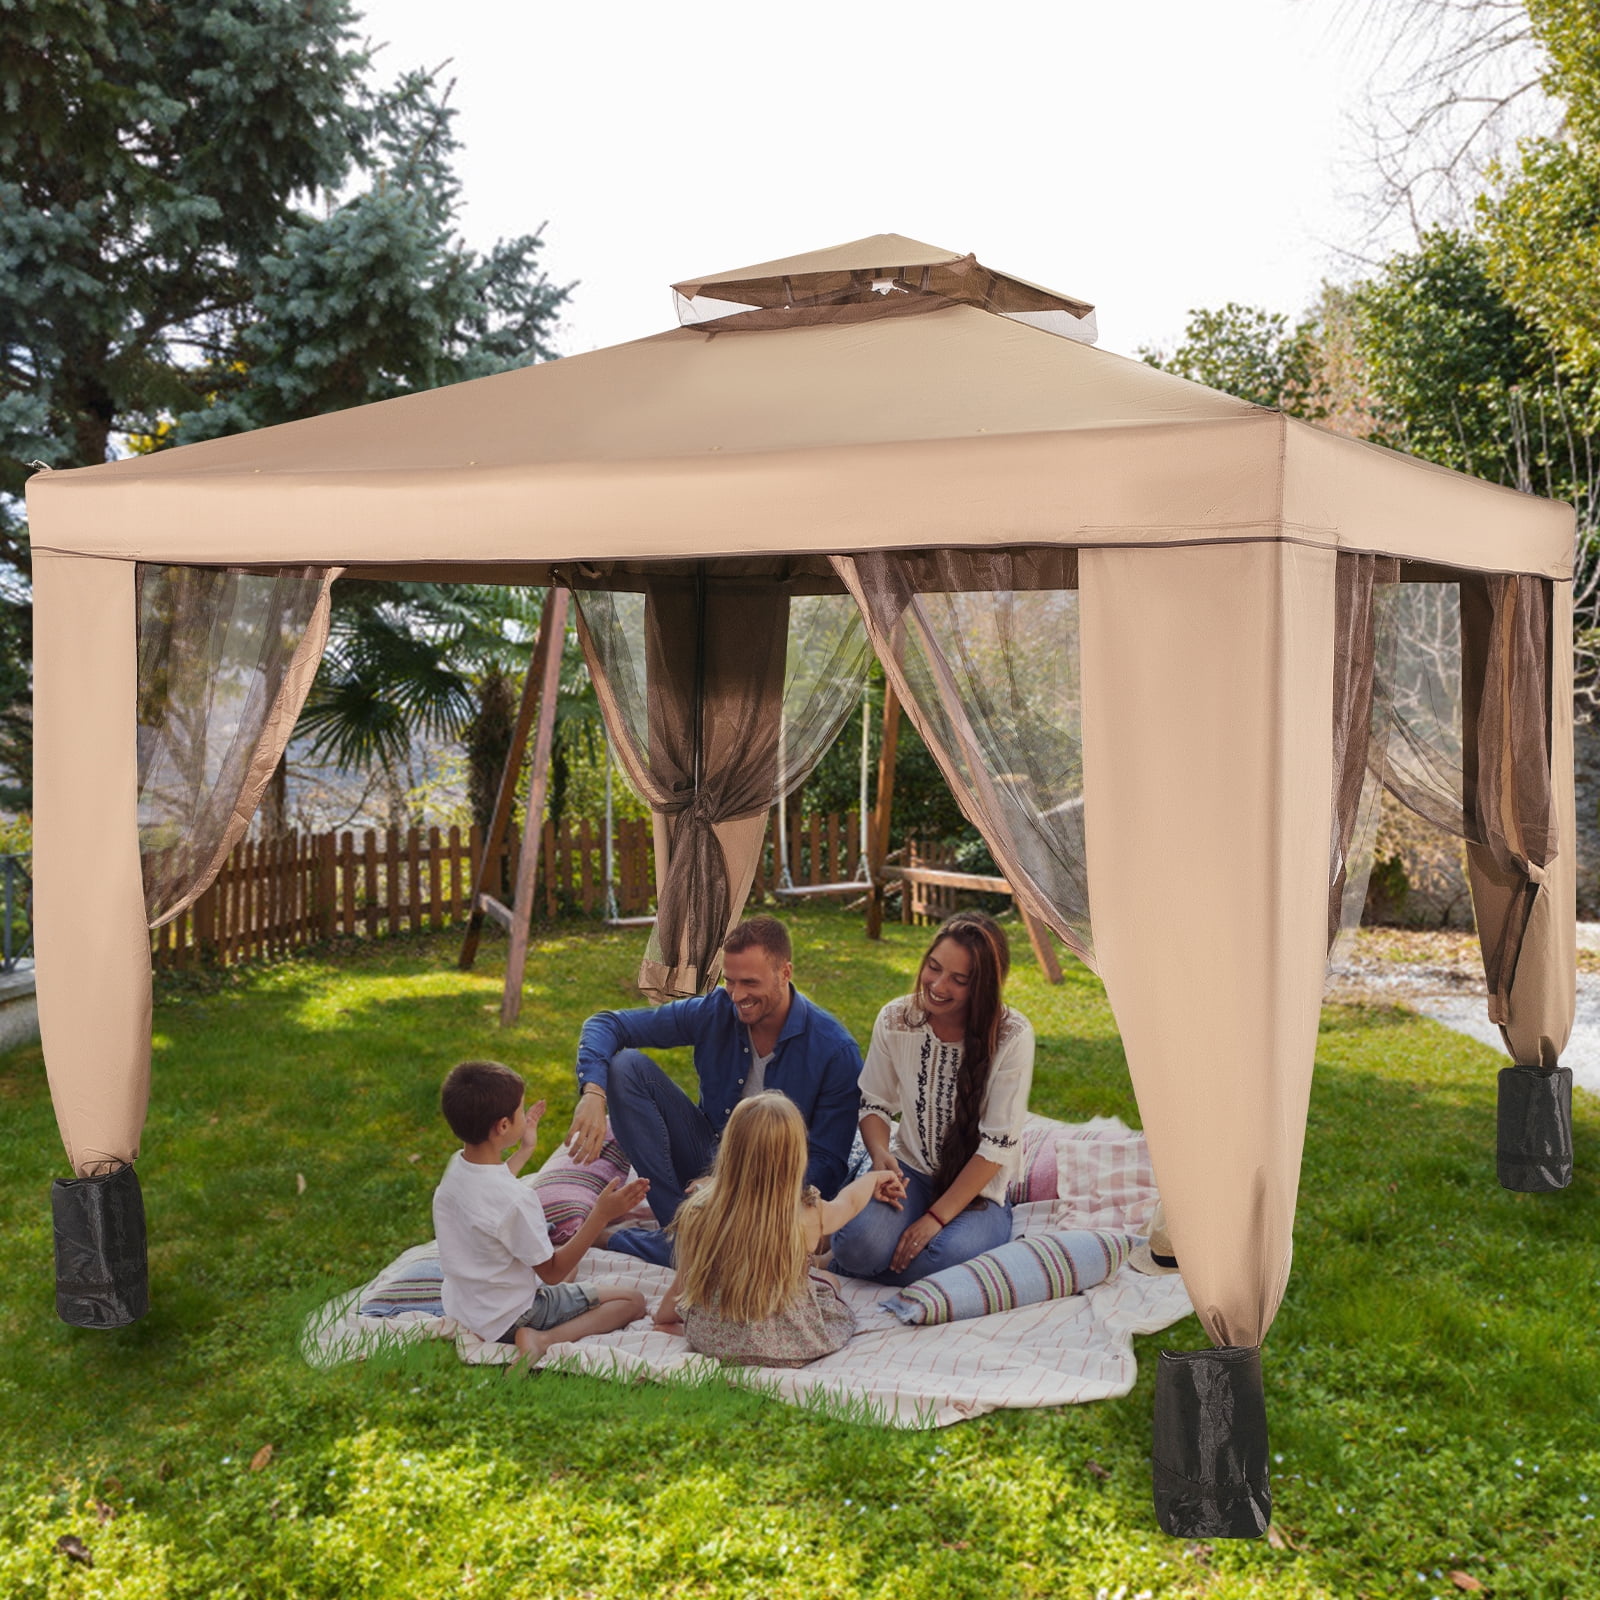 13'x13' Auto extension Push Up Gazebo Canopy Shelter Tan Height Adjustable 